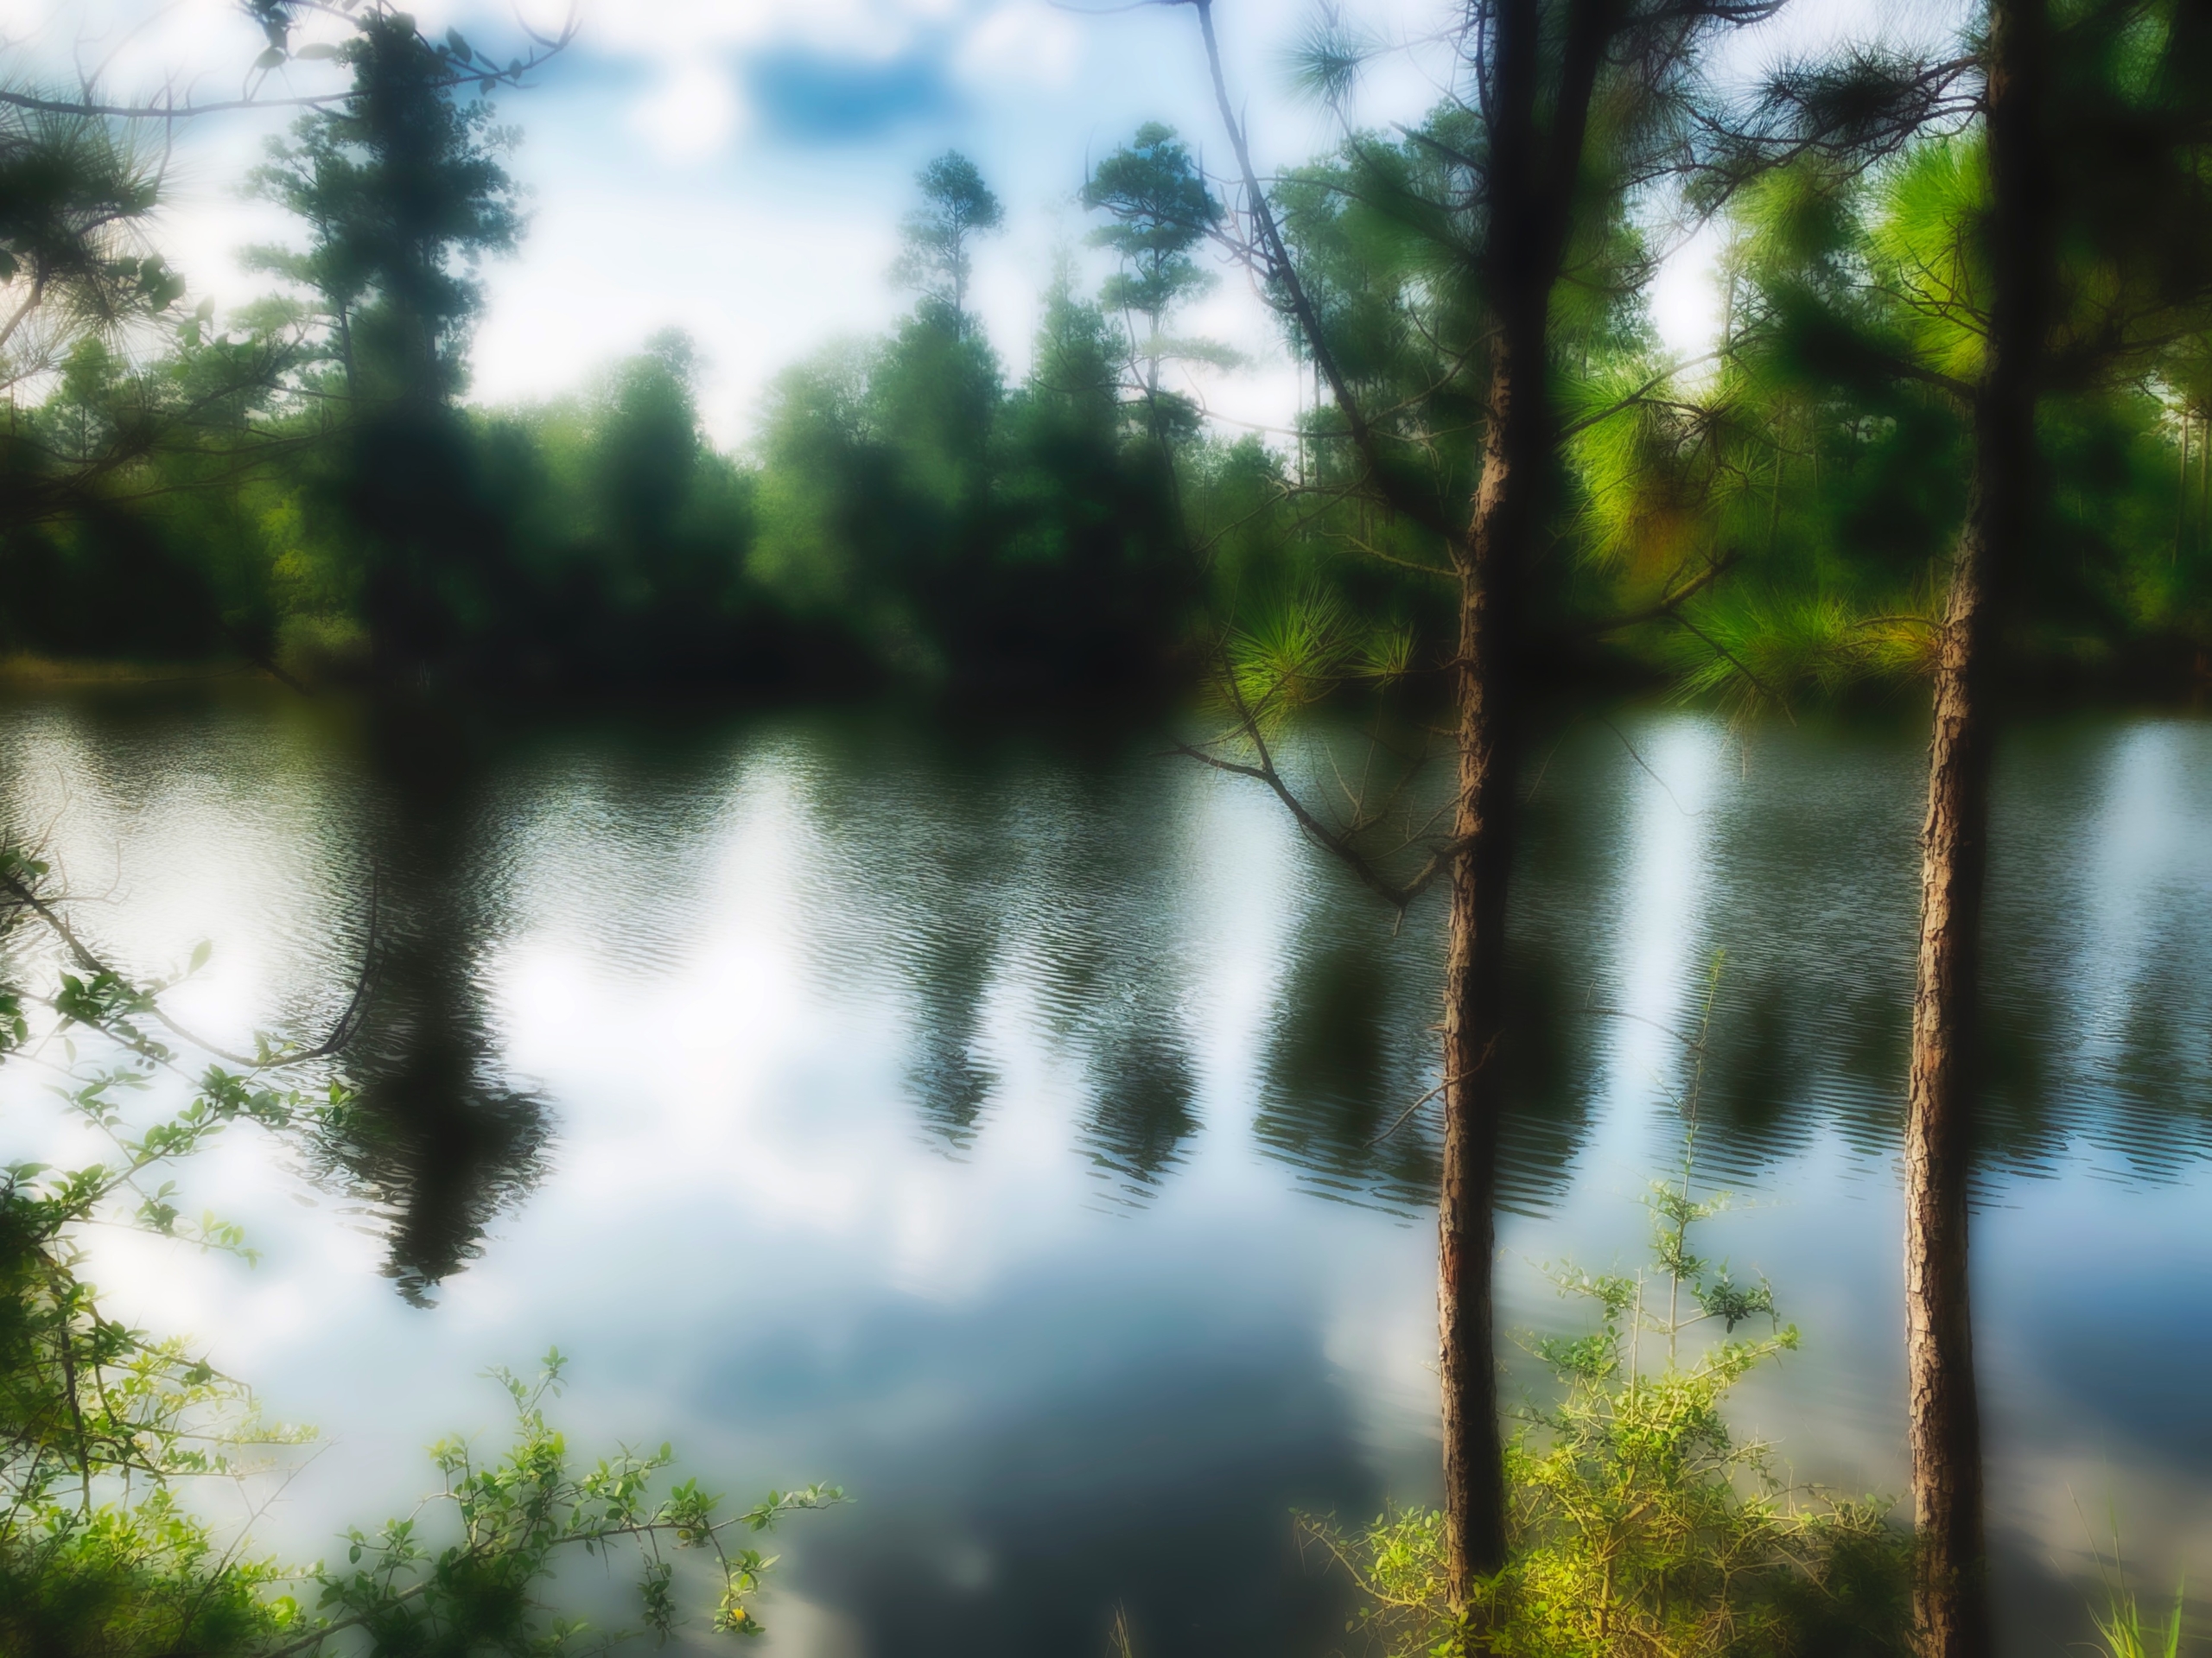 a small pond with the opposite shore of trees reflected in the water and the entire scene slightly blurred and dreamlike